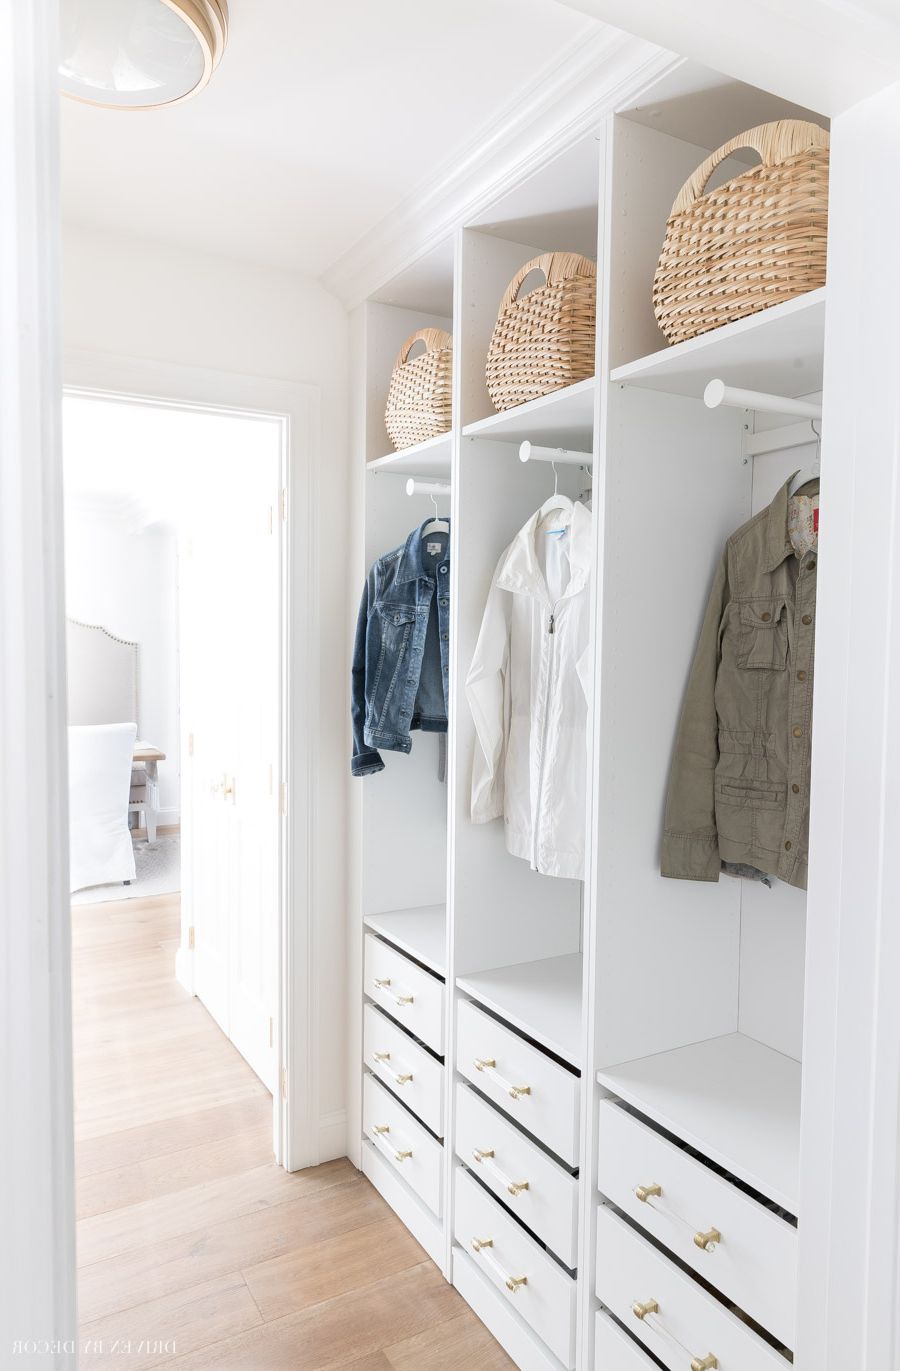 Our Ikea Mudroom Using Pax Wardrobes – Drivendecor Throughout Wardrobes Drawers And Shelves Ikea (Gallery 14 of 20)